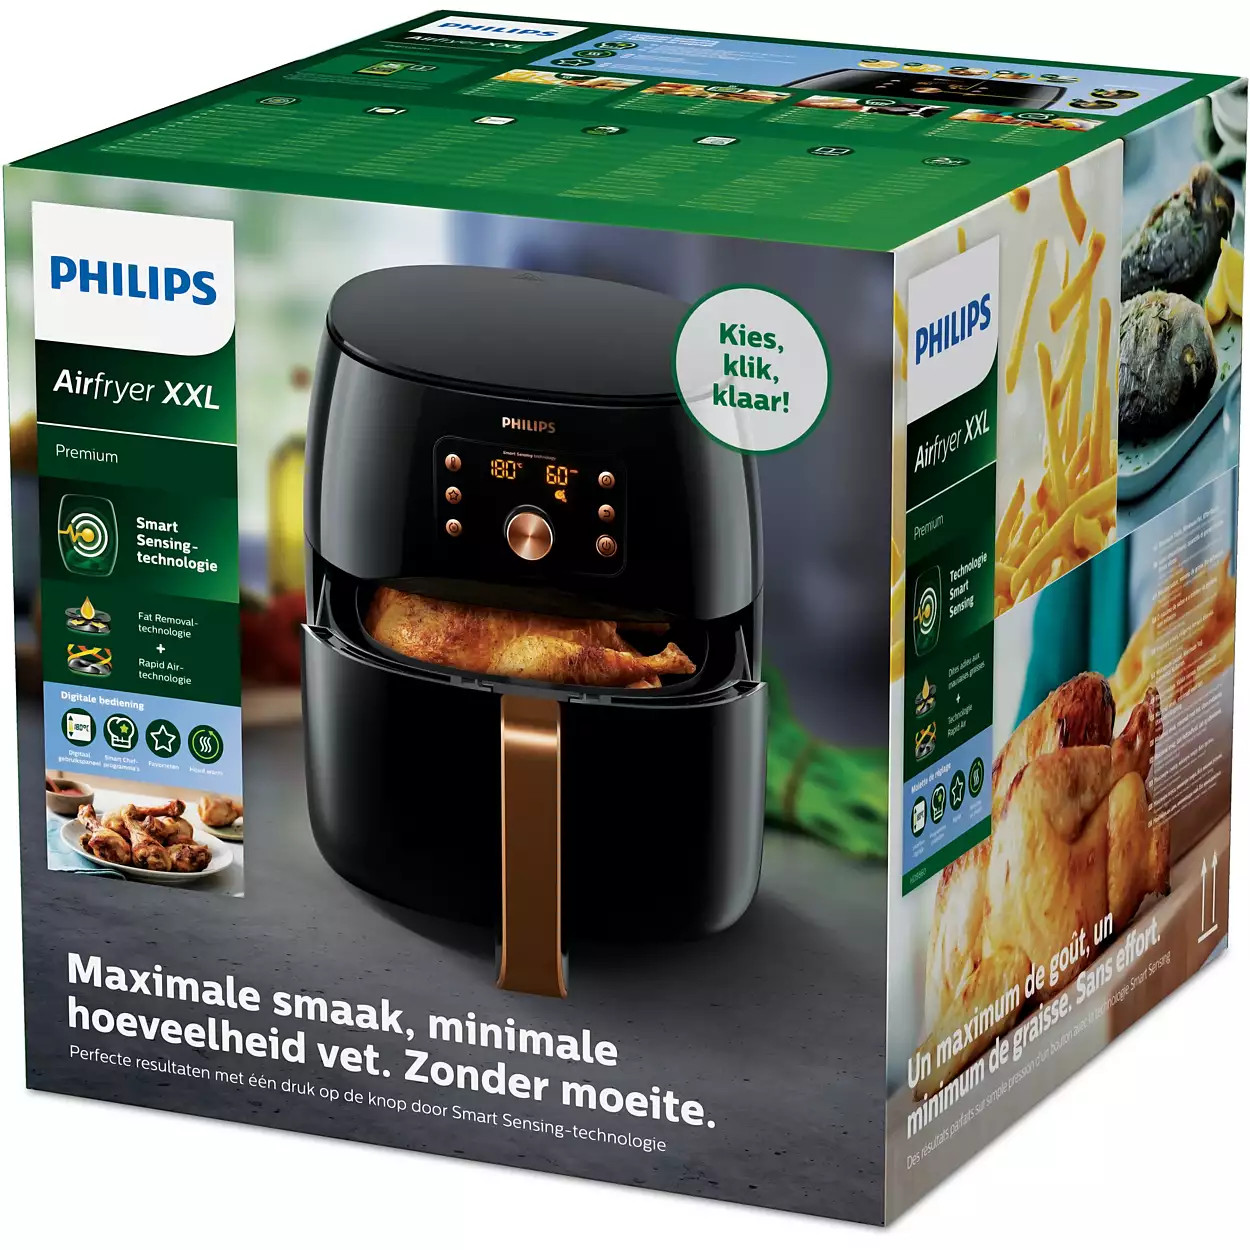 Unboxing of the philips-hd9860-90-airfryer-xxl-premium